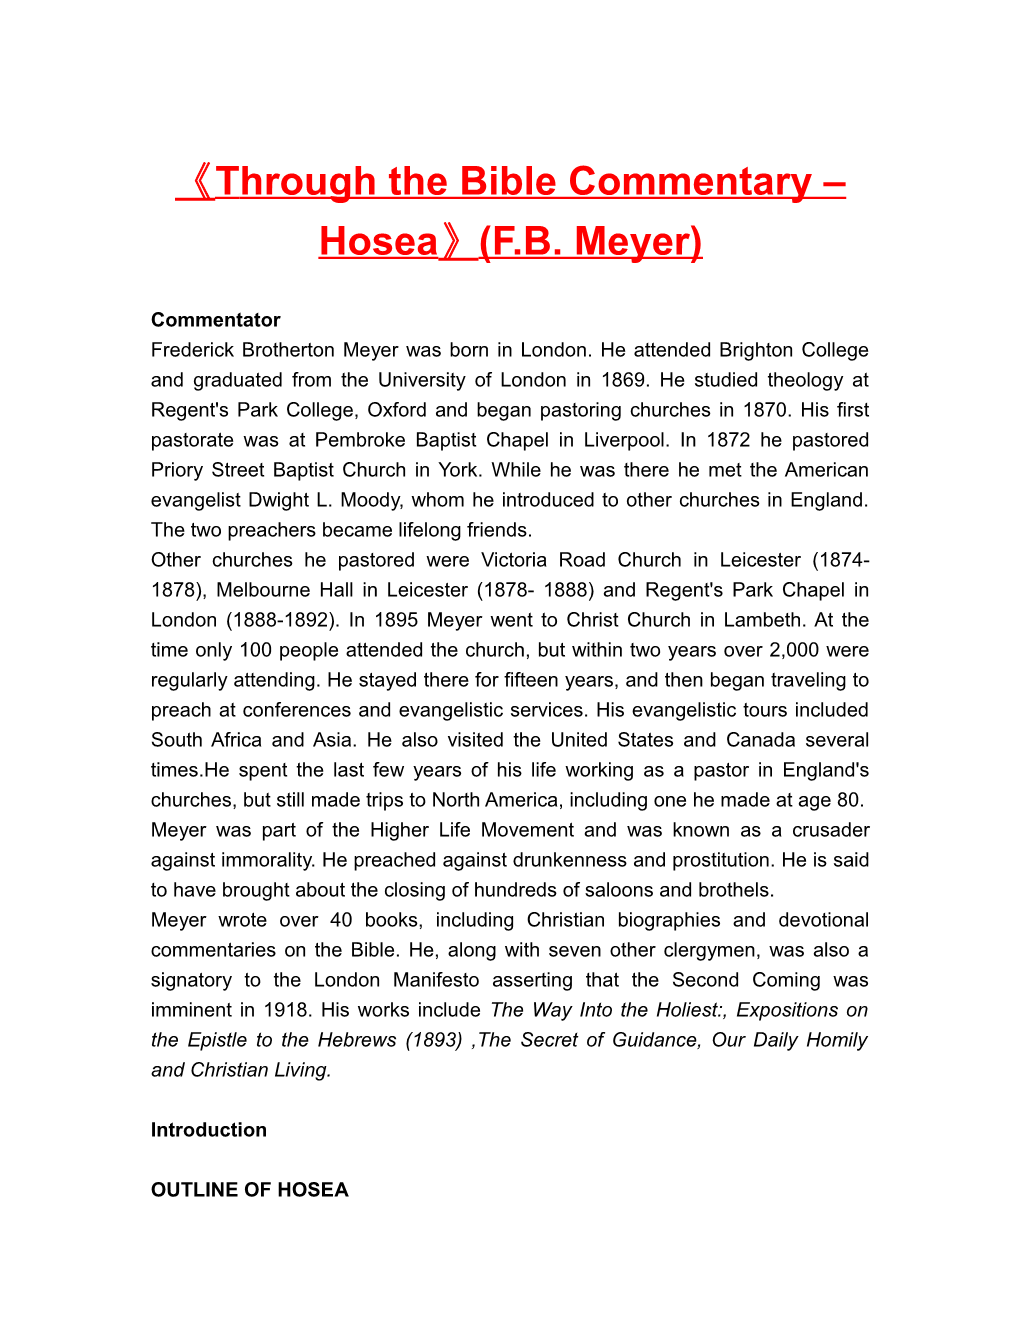 Through the Bible Commentary Hosea (F.B. Meyer)